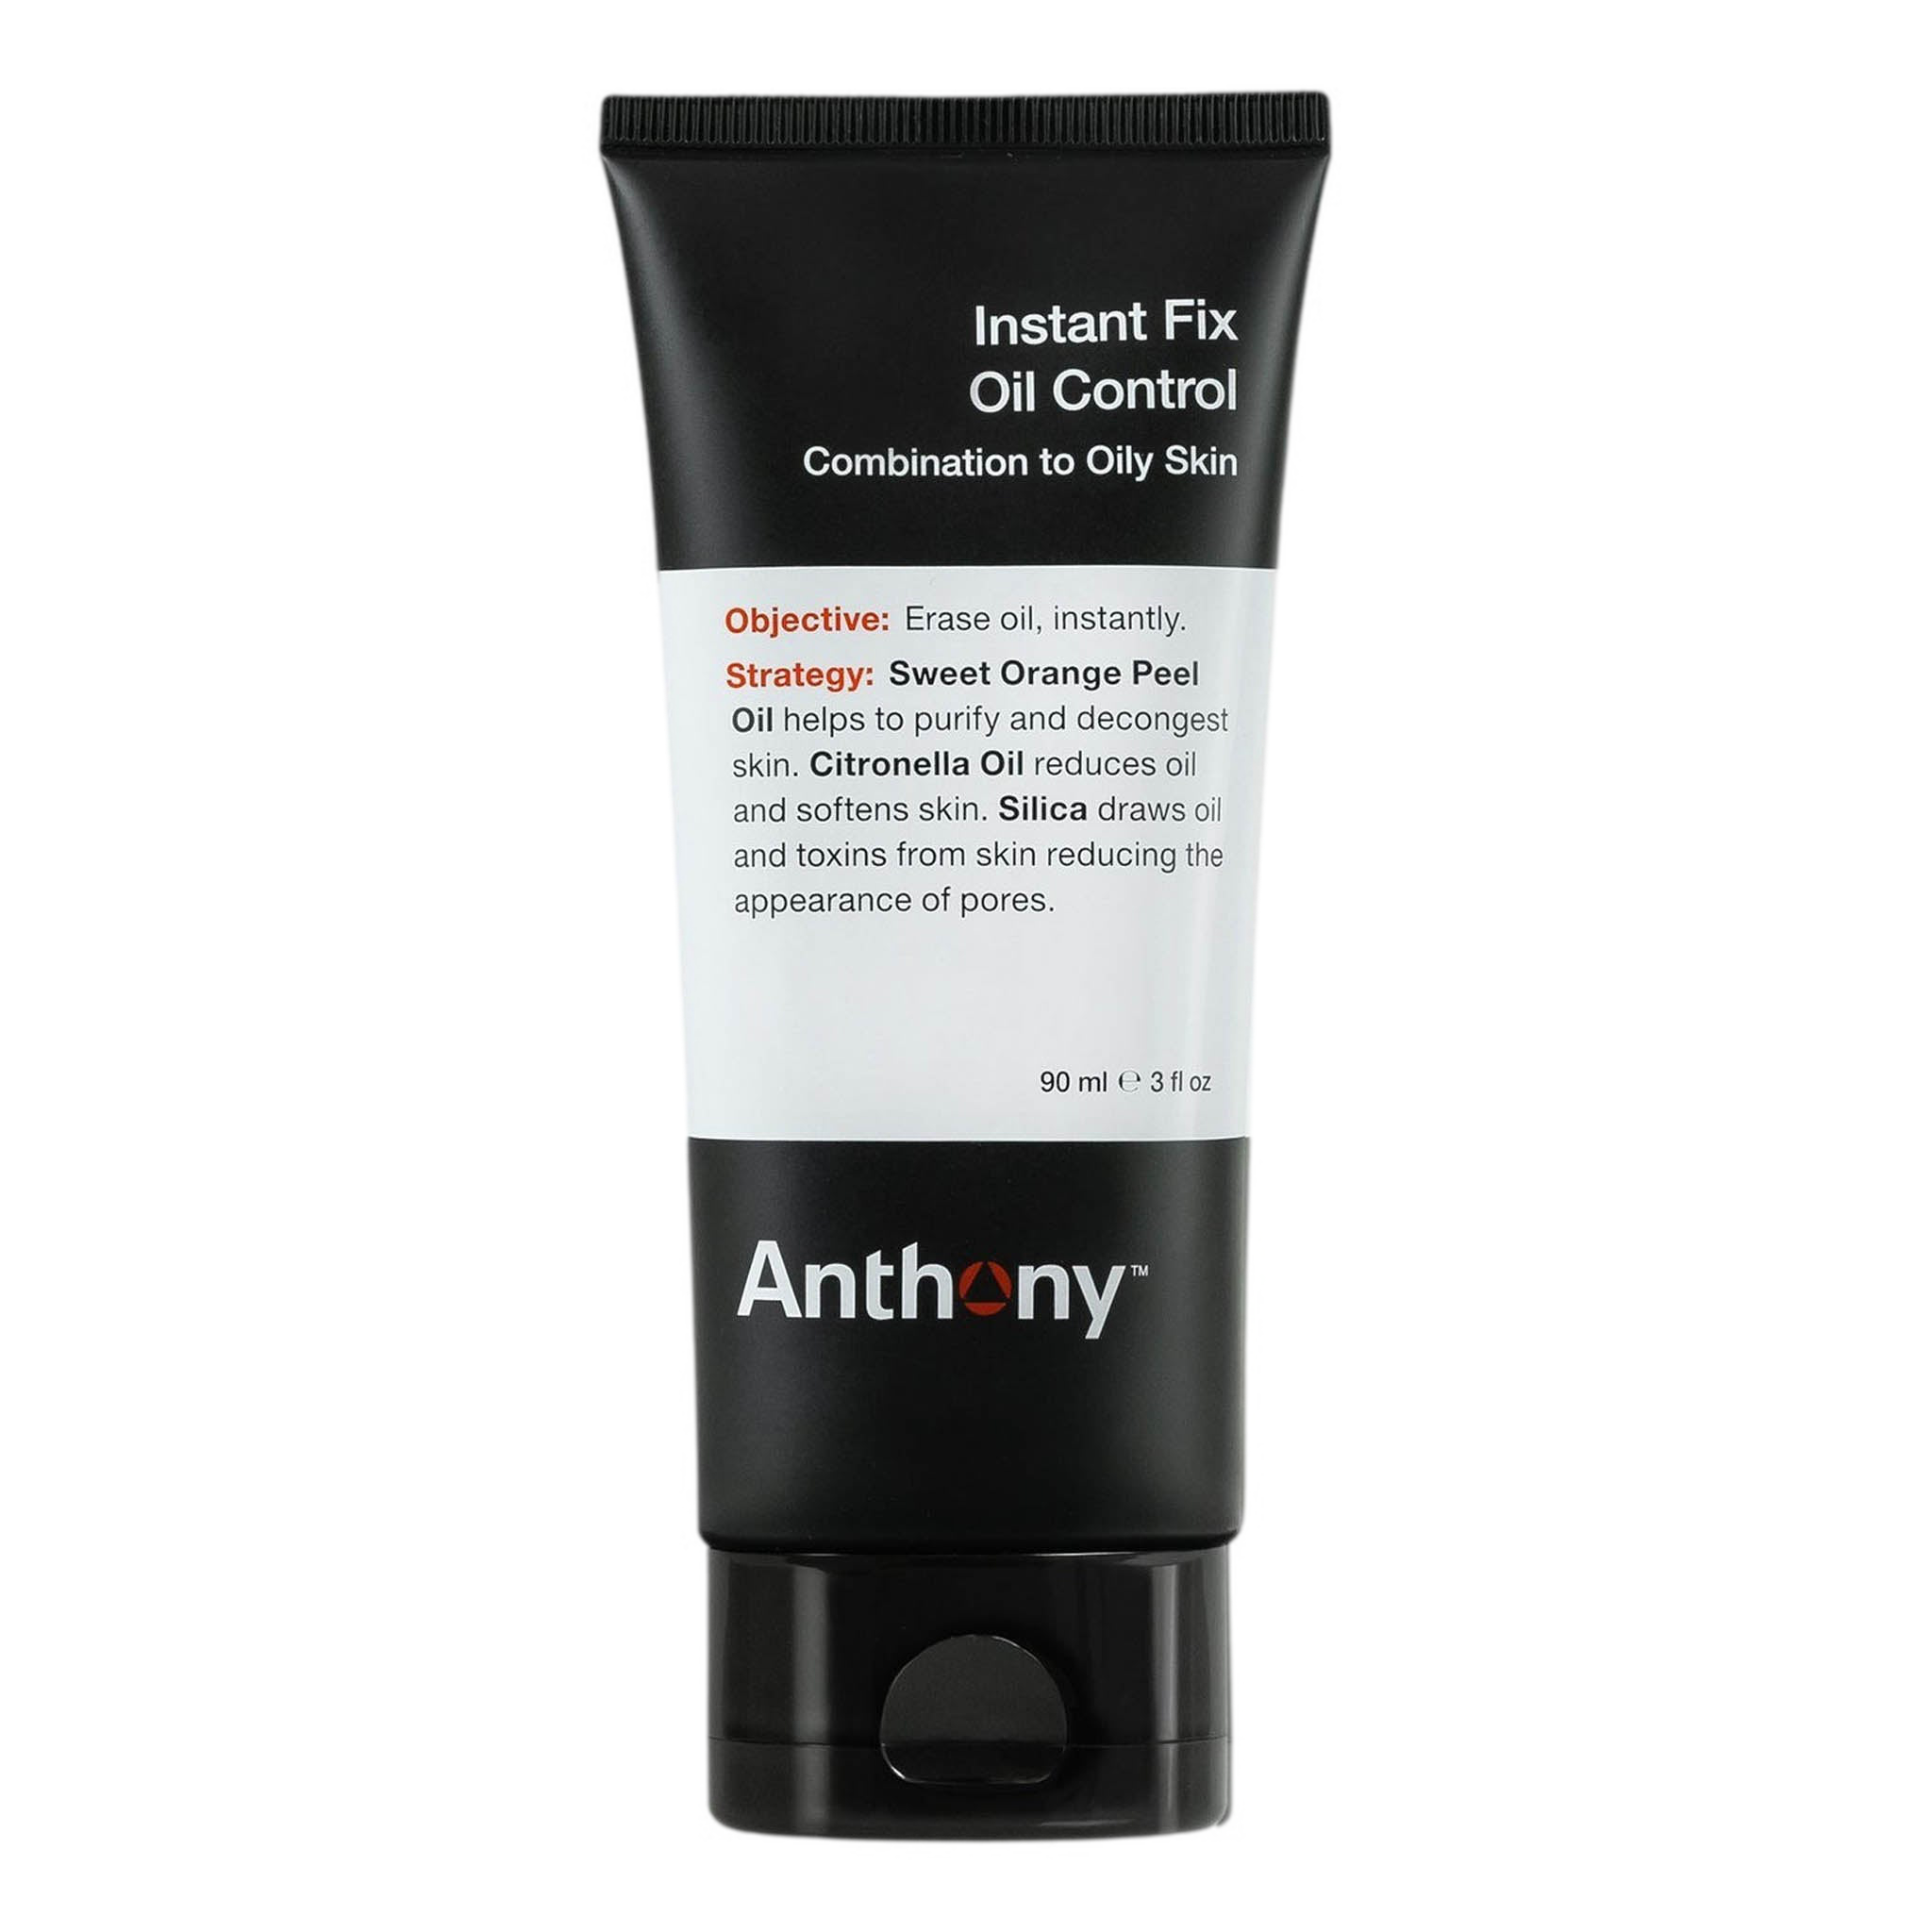 Anthony Instant Fix Oil Control Lotion